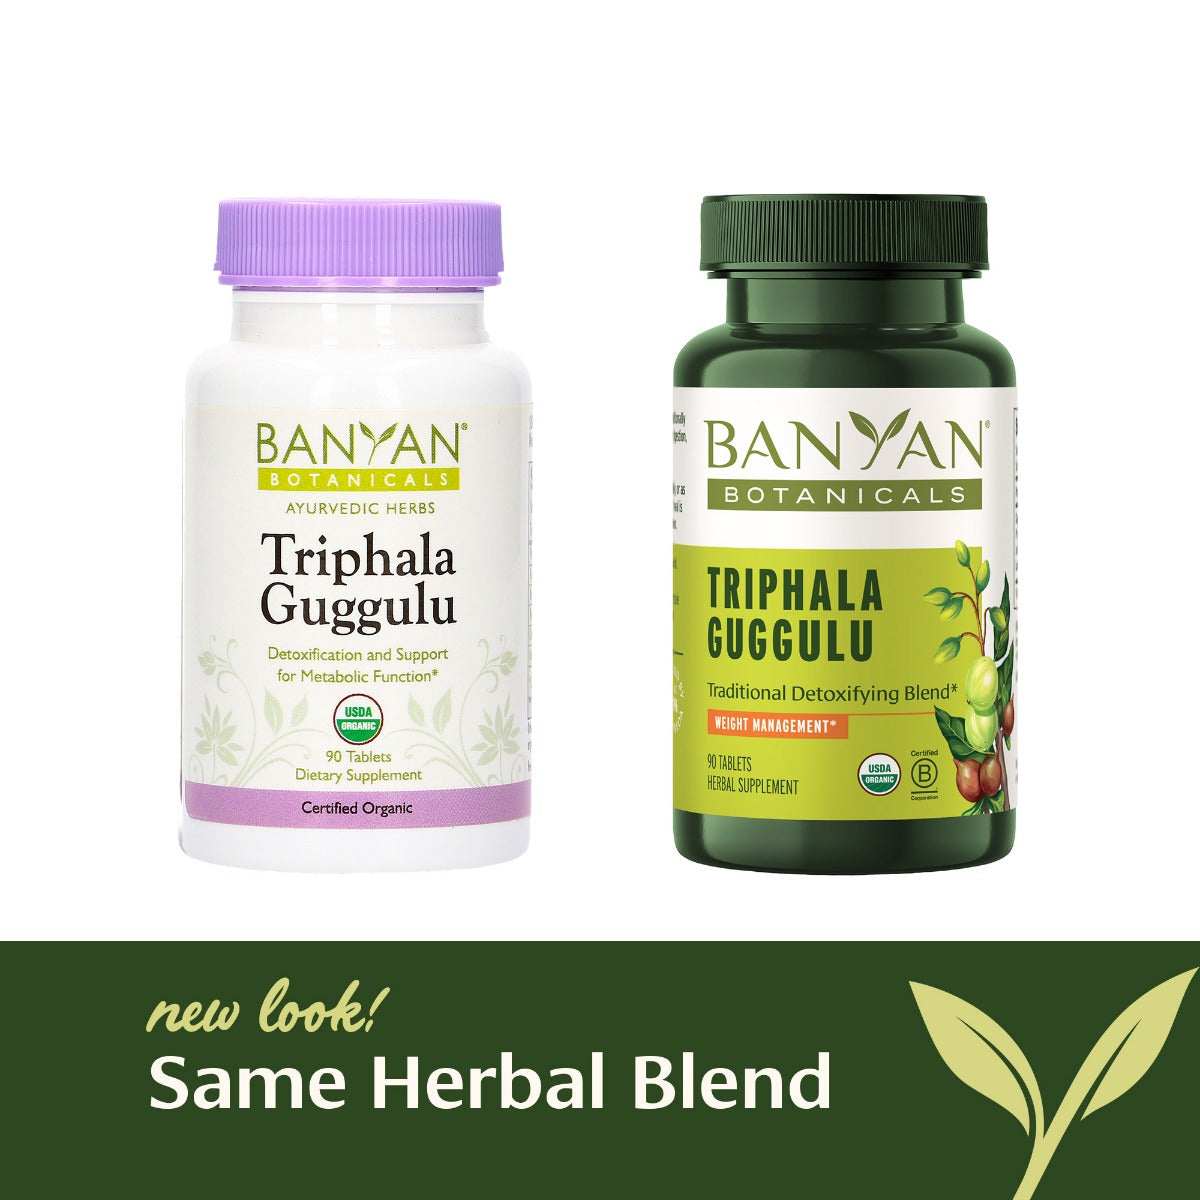 Triphala Guggulu tablets loose new vs old graphic